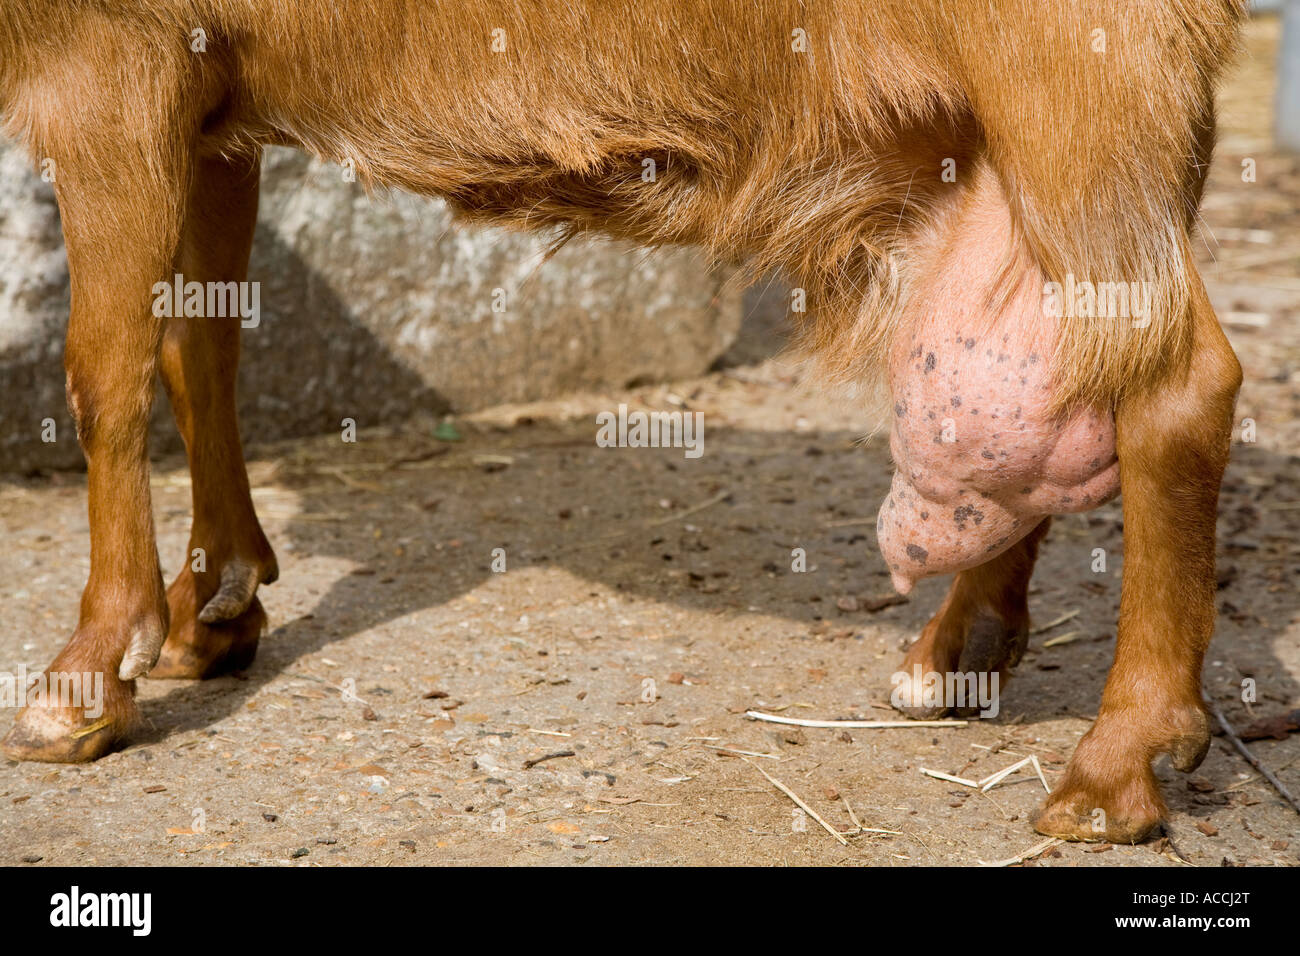 Goat legs and udders Stock Photo